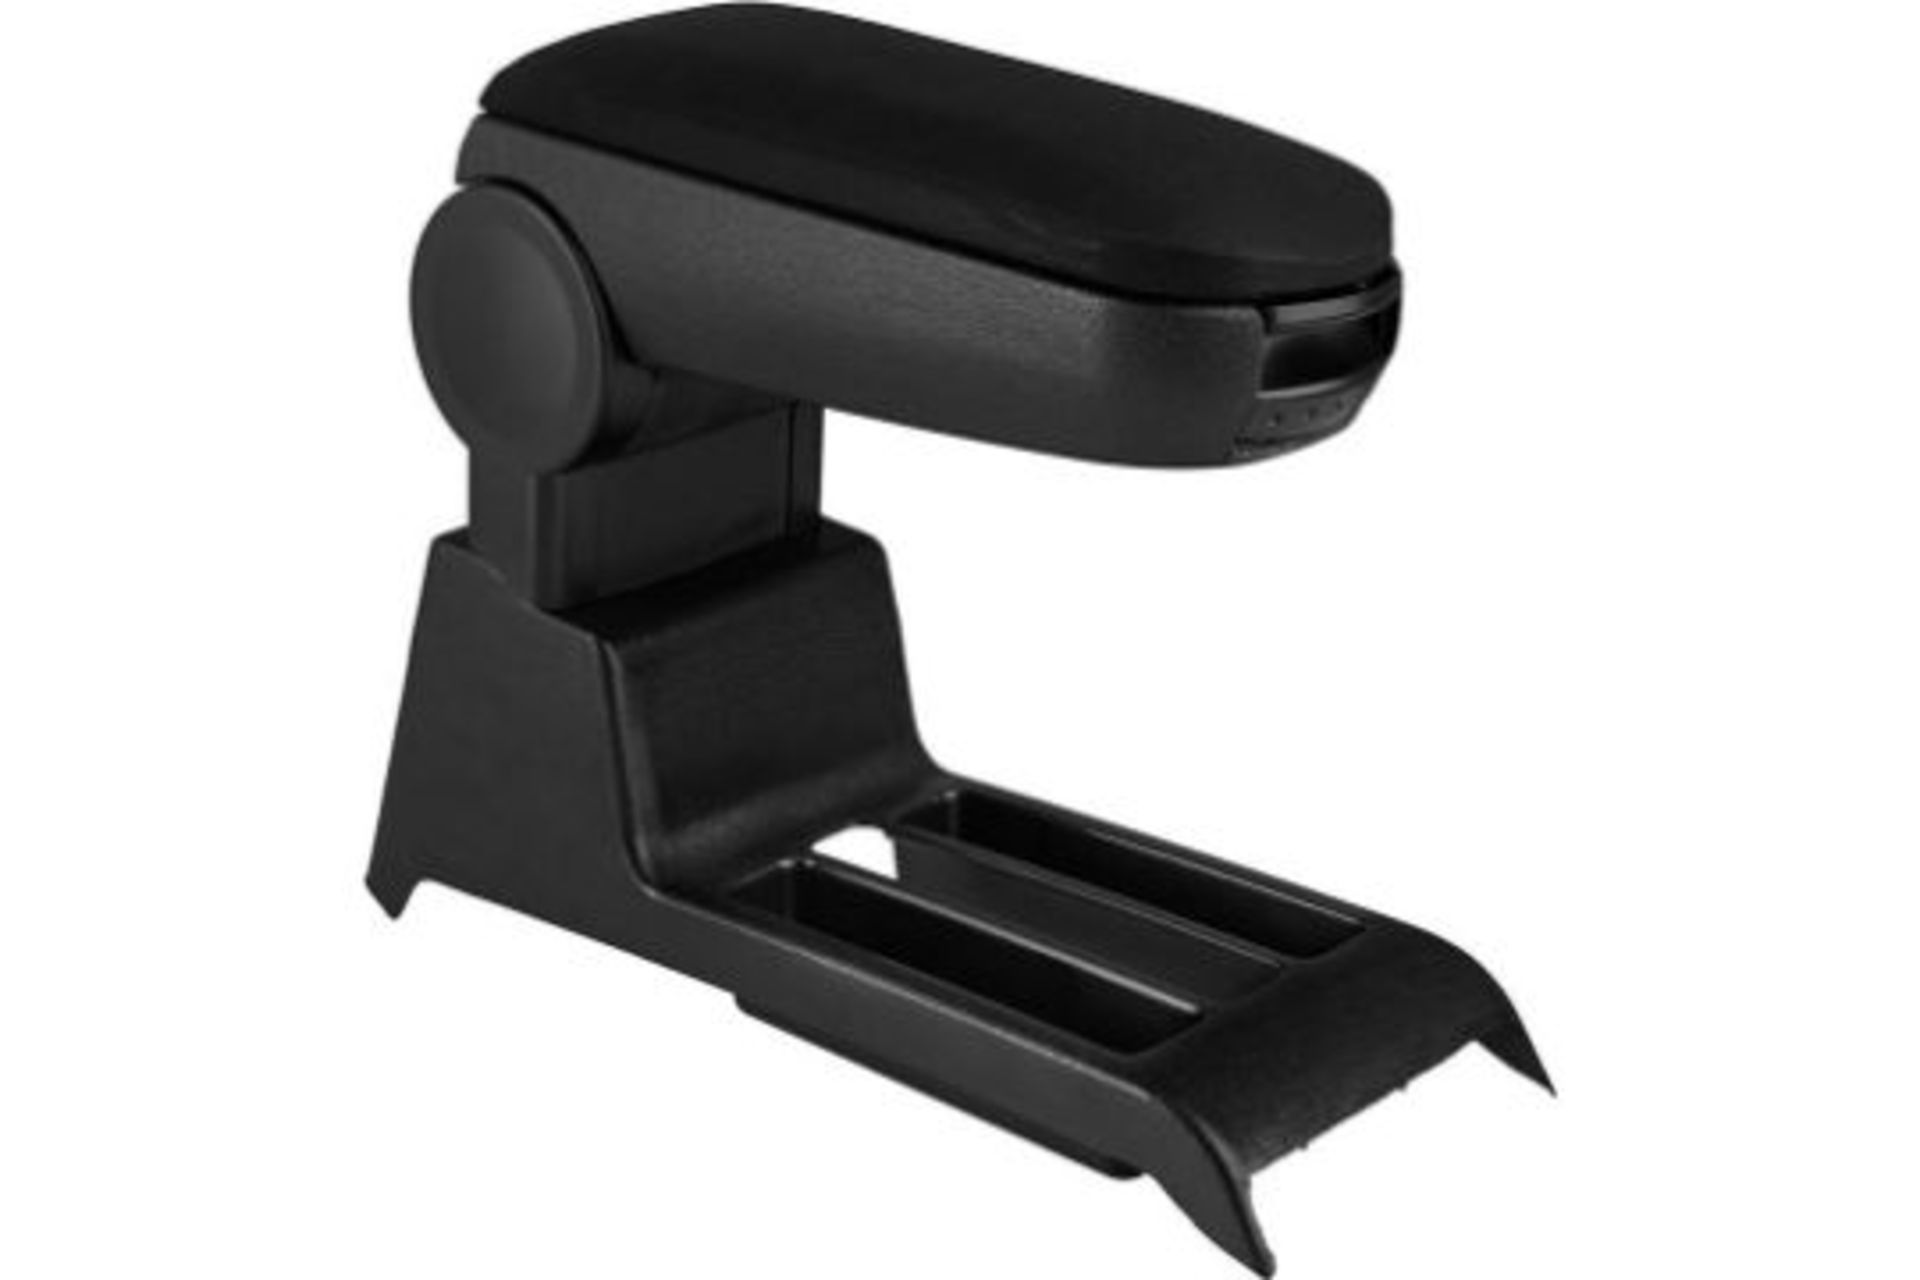 Padded Centre Armrest, Large Storage Compartment Inside. - R13A.8. Inside there is a practical